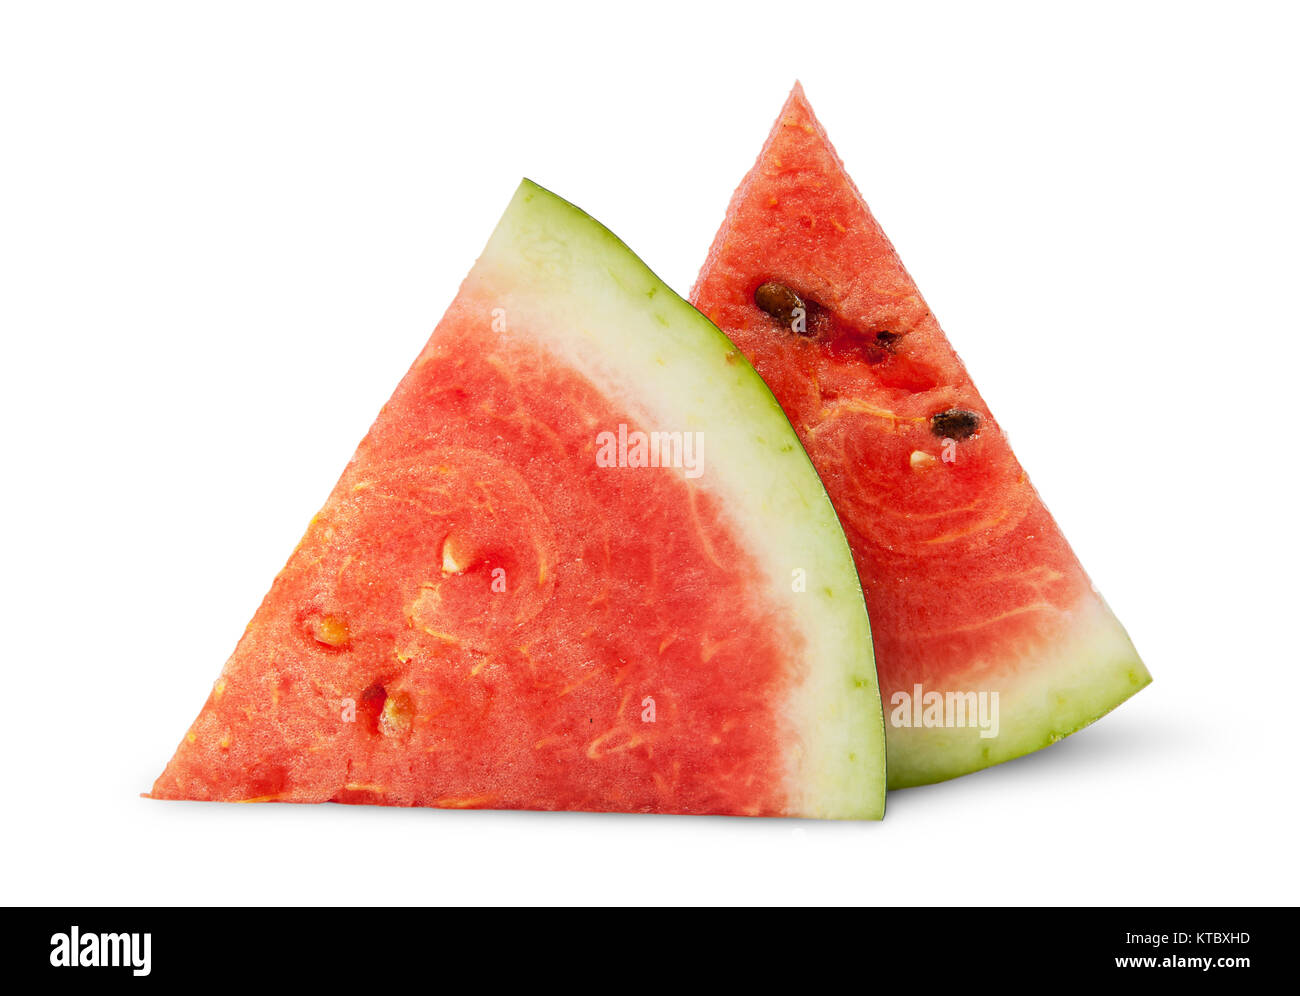 Two pieces of ripe watermelon each other Stock Photo